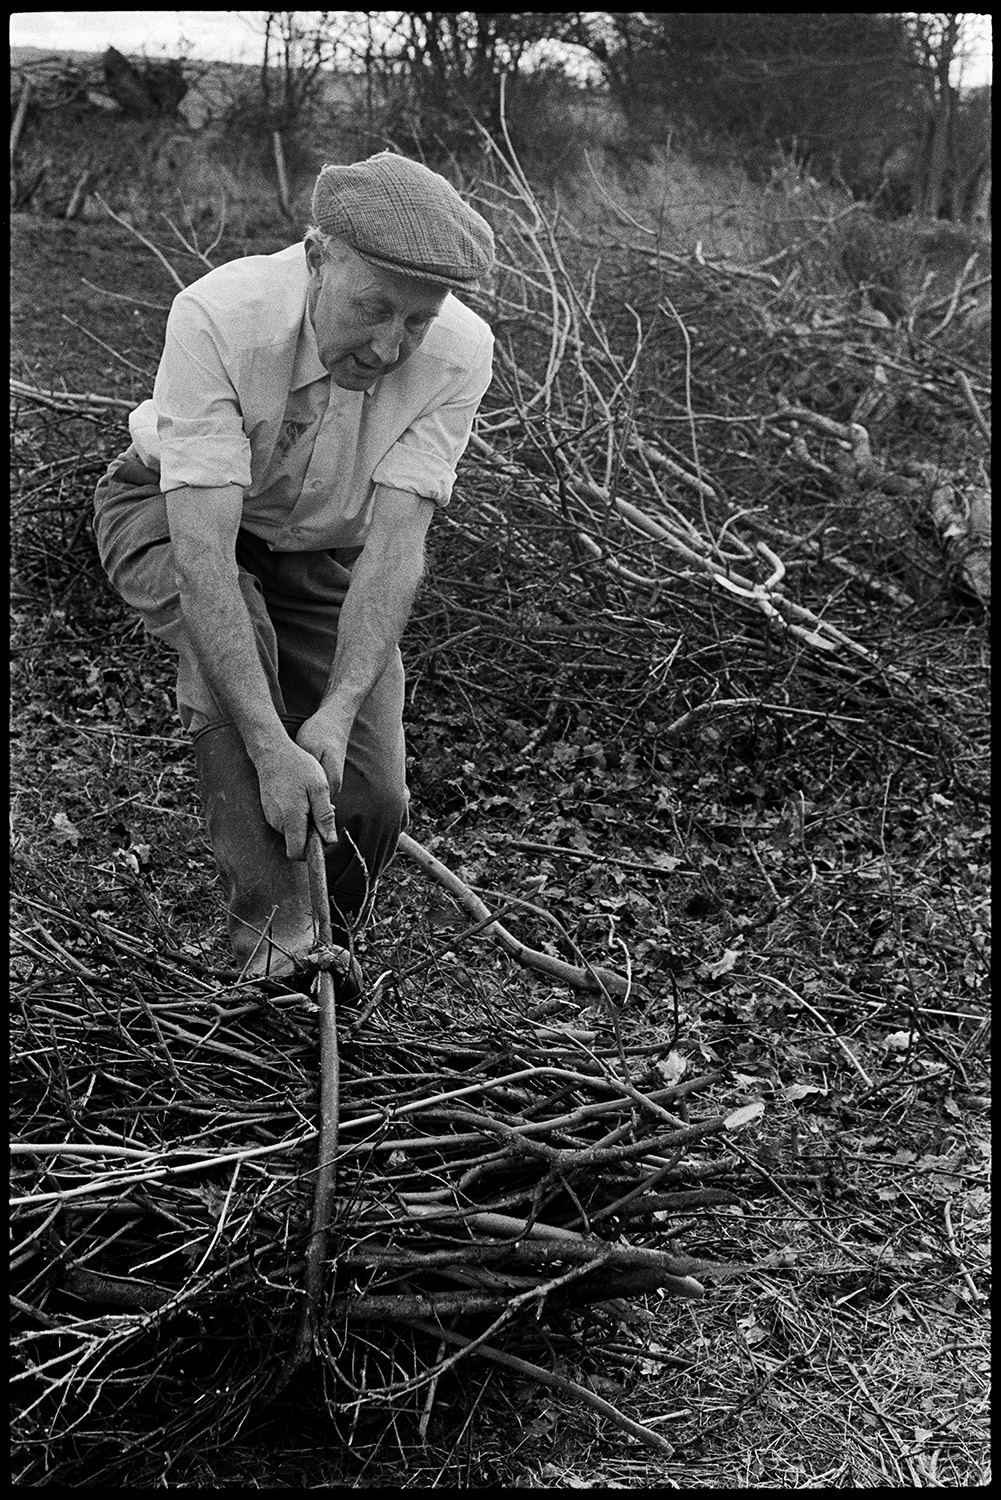 Man making bundles of sticks from hedge cuttings, faggots. 
[Mr Allen tying up a bundle of sticks, or faggots, next to a hedge in Dolton.]